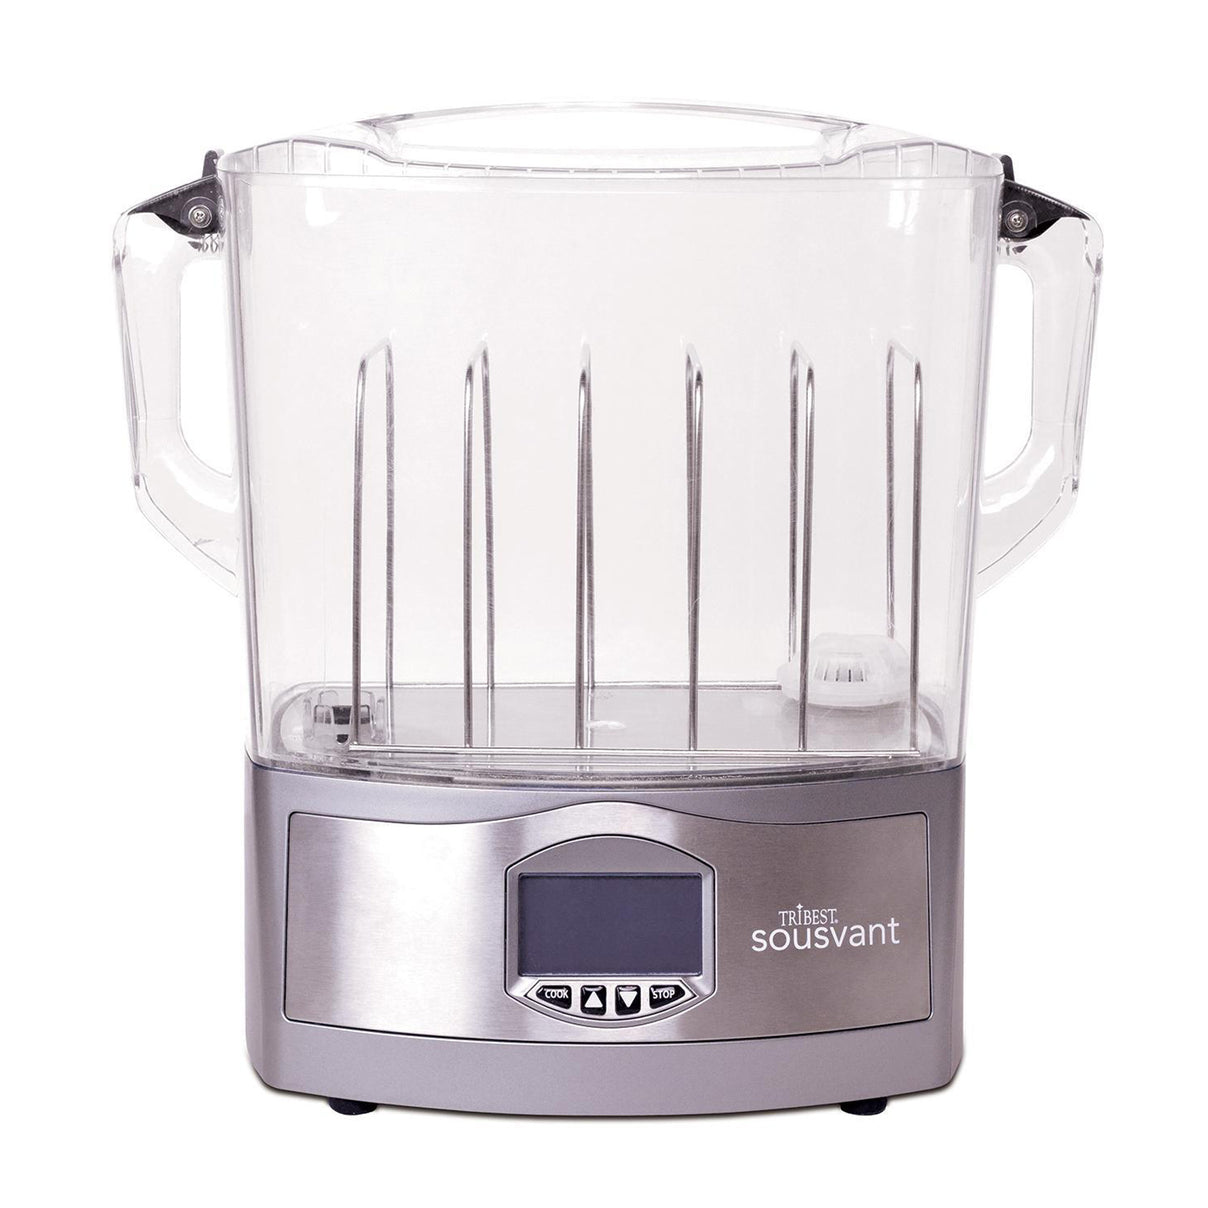 For Sousvant® Sous Vide Circulator SV-101. The Sousvant® Rack separates food pouches to maximize the number of portions the water oven will hold and also helps to keep food pouches submerged. It allows for proper circulation and ensure even cooking.